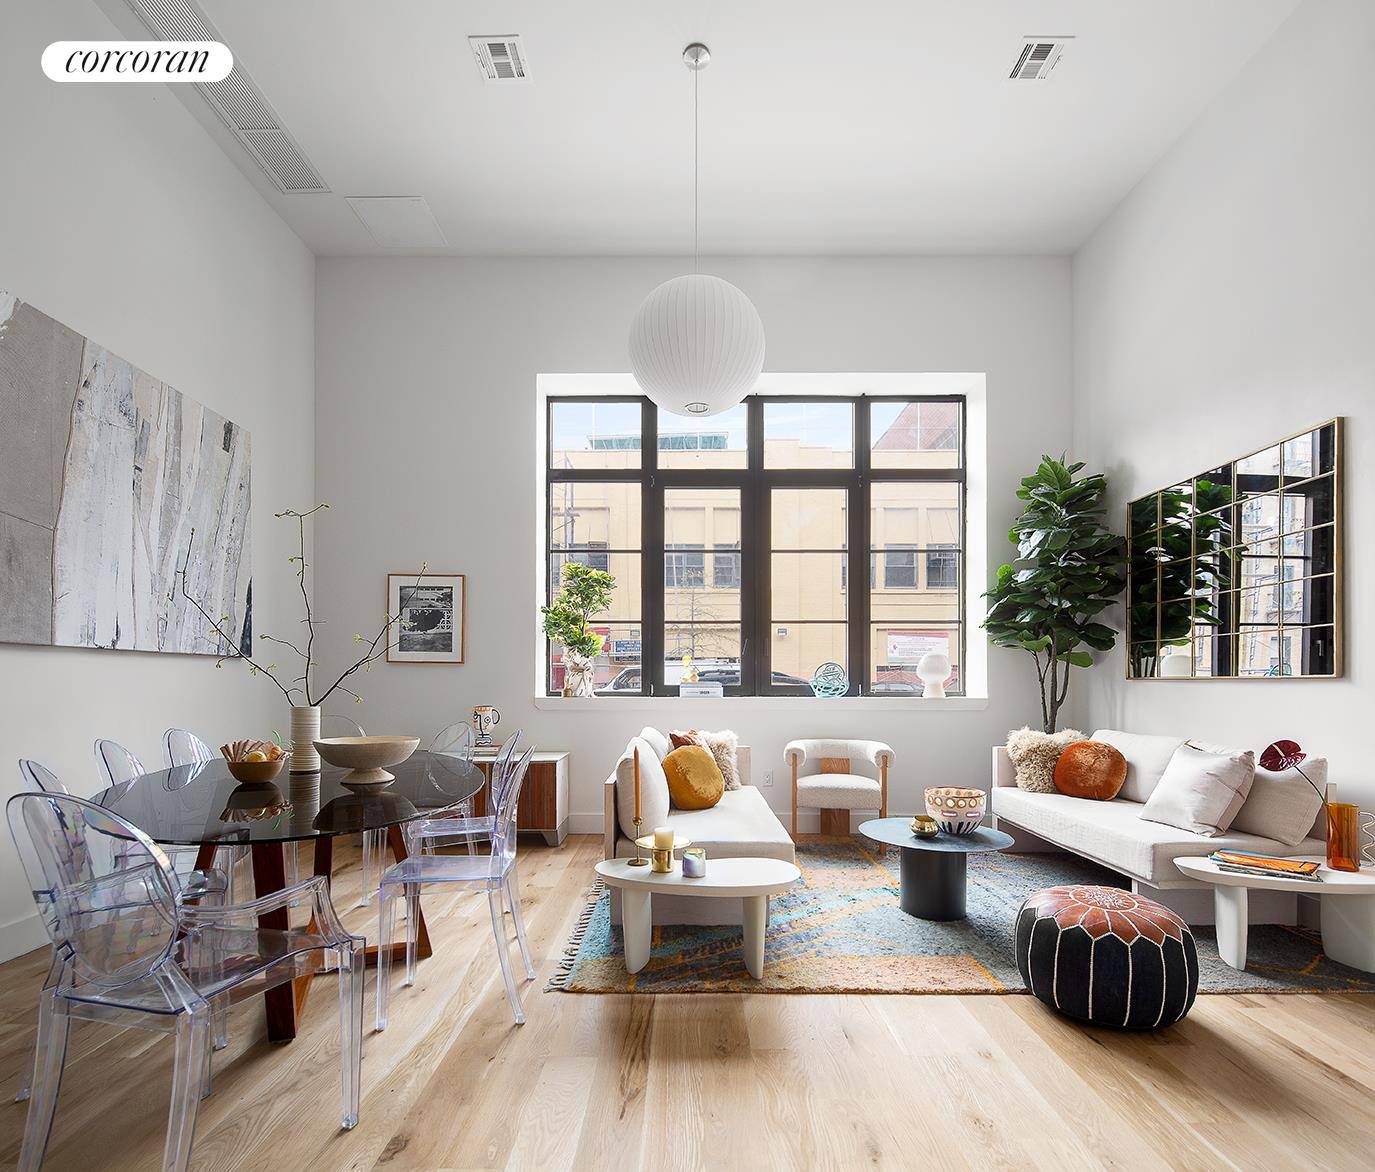 IMMEDIATE OCCUPANCY ! The new 10 Quincy Street The Salvation Lofts is a rare and architecturally captivating authentic loft condo conversion, located on a quiet corner in one of Brooklyn's ...